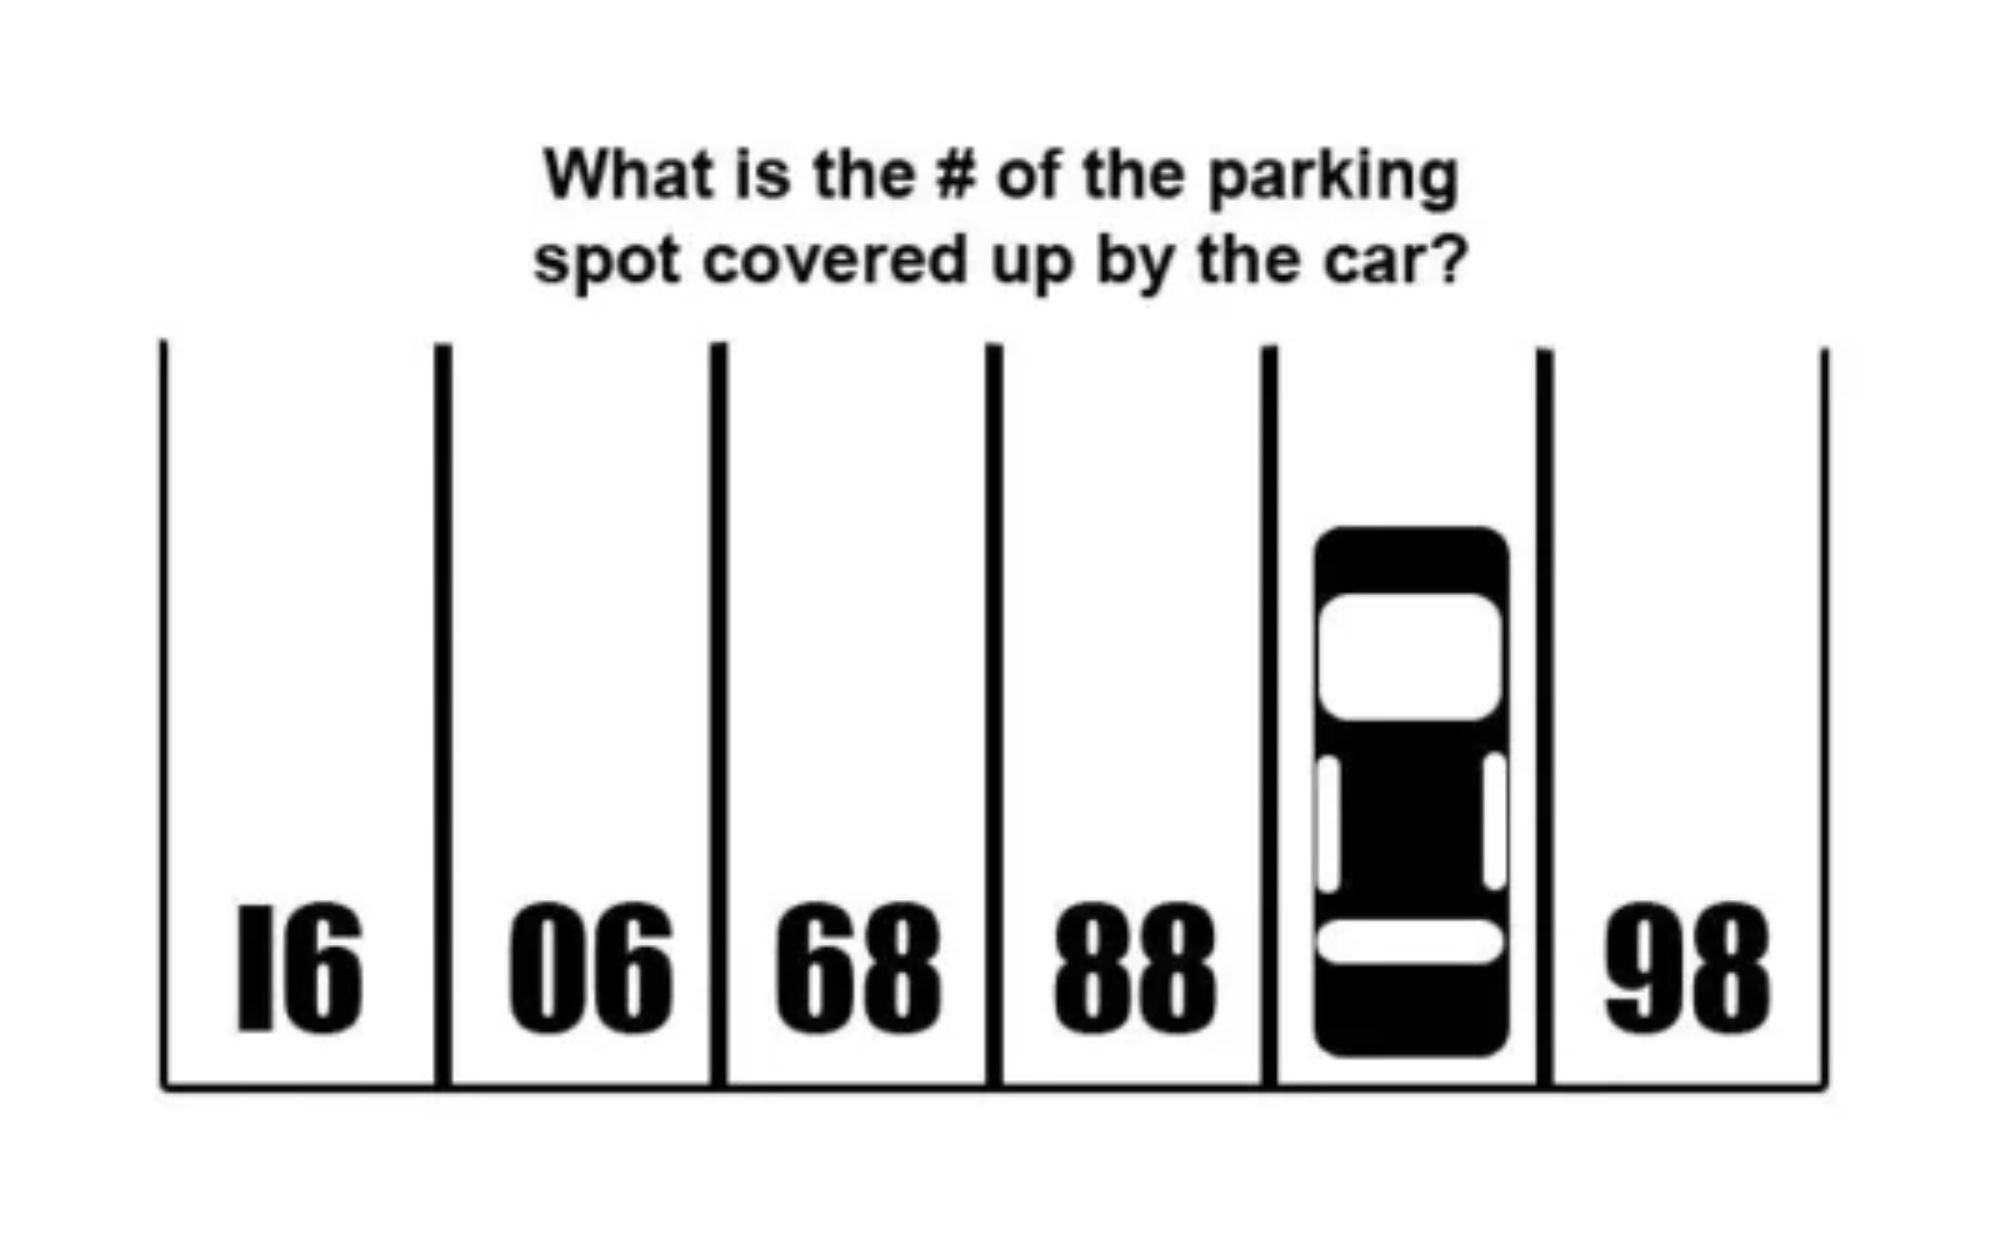 A vehicle that parks in the fifth column and the remaining columns has a specific number